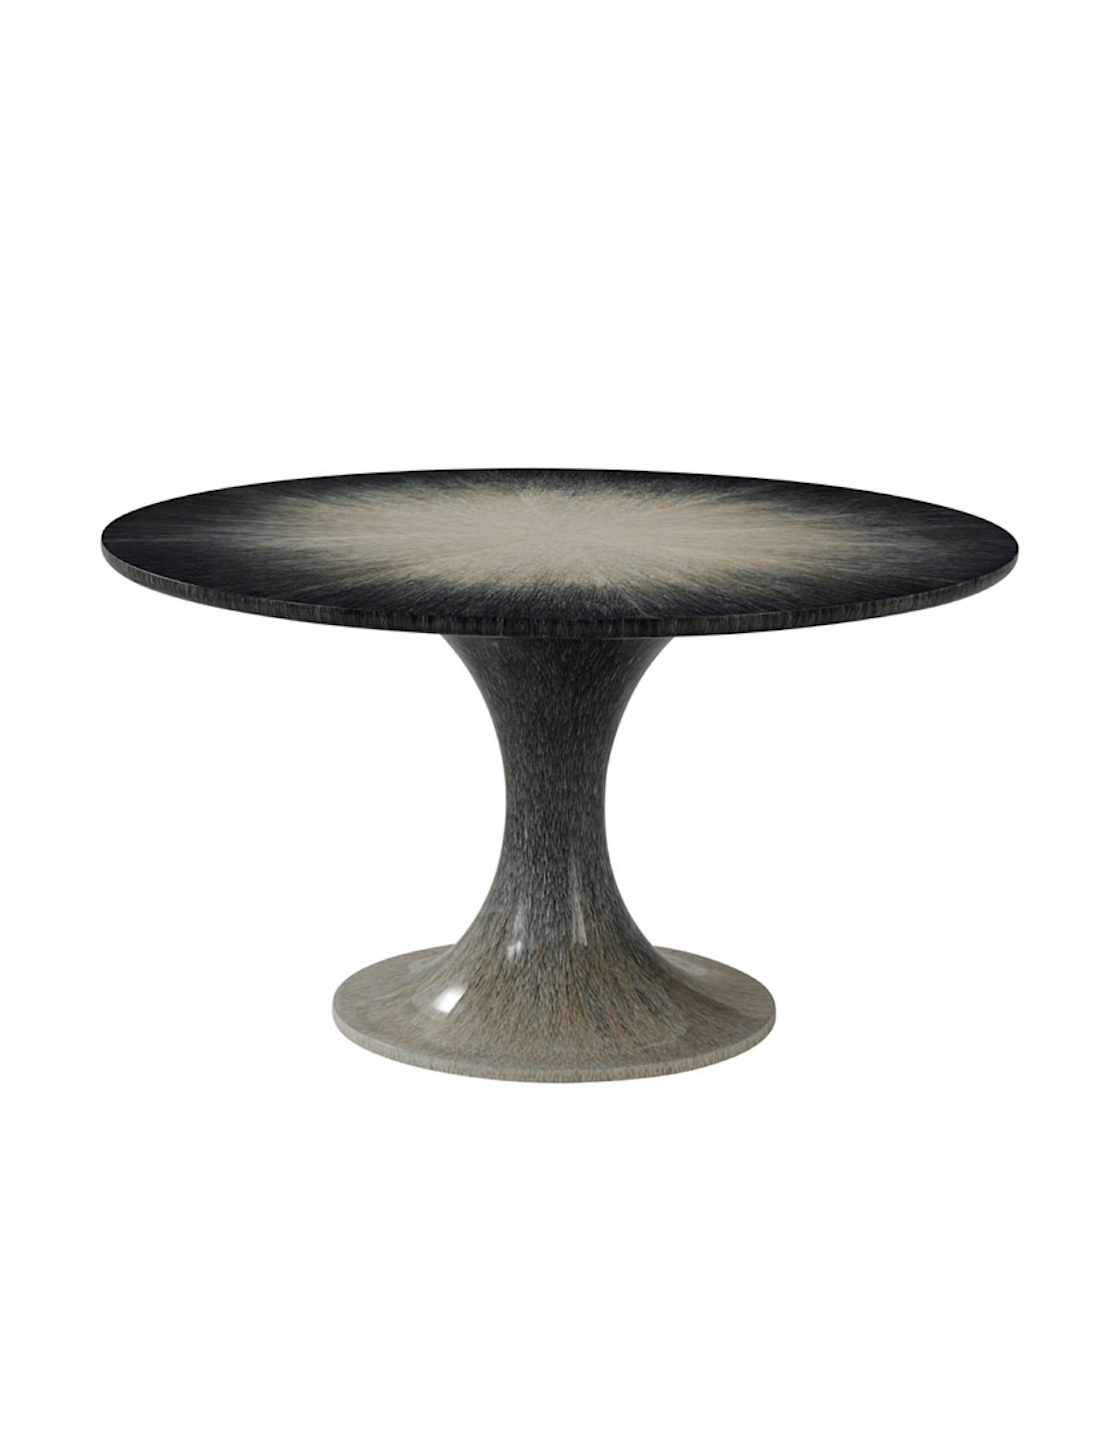 NYDC-Women-In-Design-Theodore-Alexander-Panos Dining Table-2